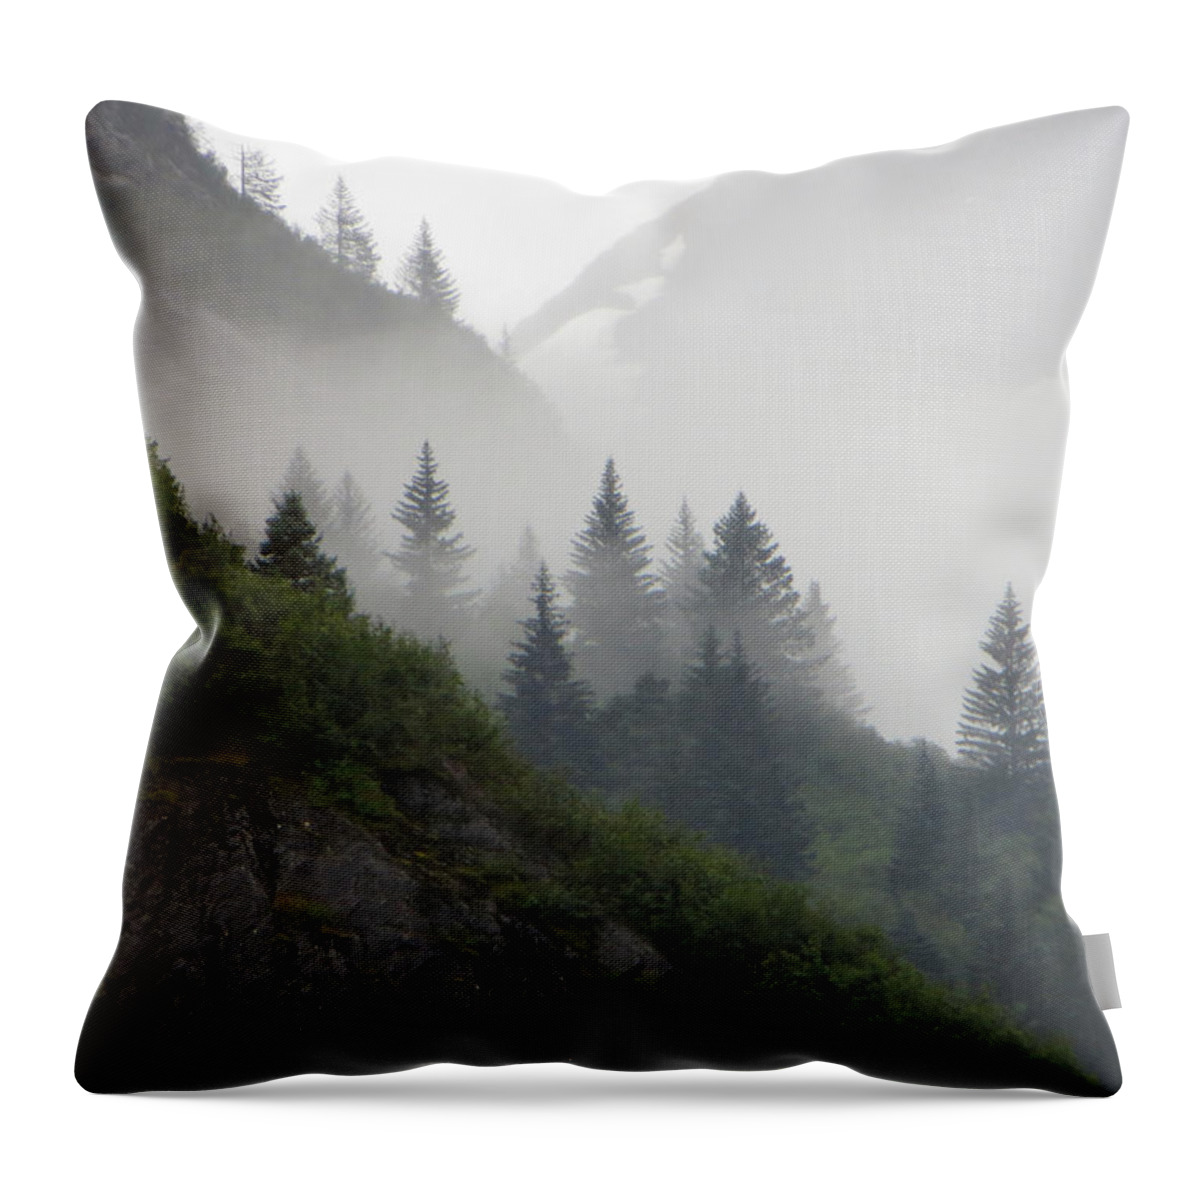 Sawyer Throw Pillow featuring the photograph Blanket Of Fog by Jennifer Wheatley Wolf